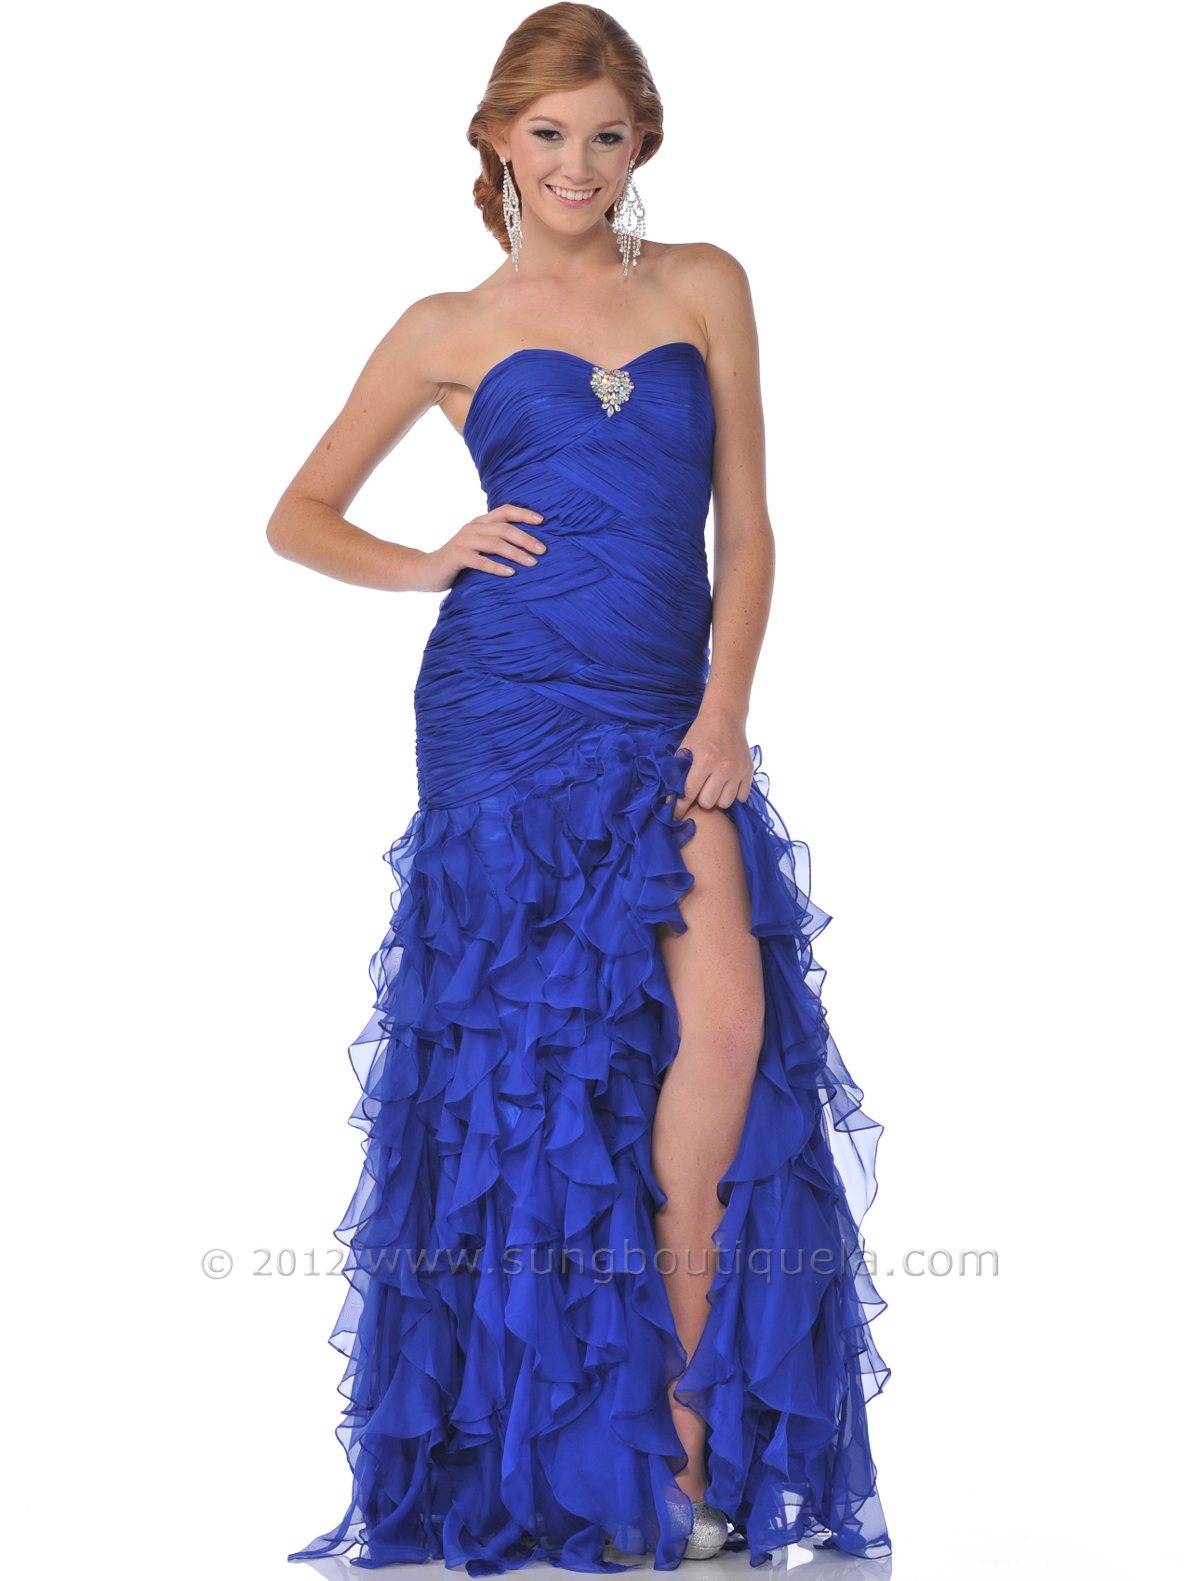 Royal Blue Strapless Evening Dress with Slit | Sung Boutique L.A.